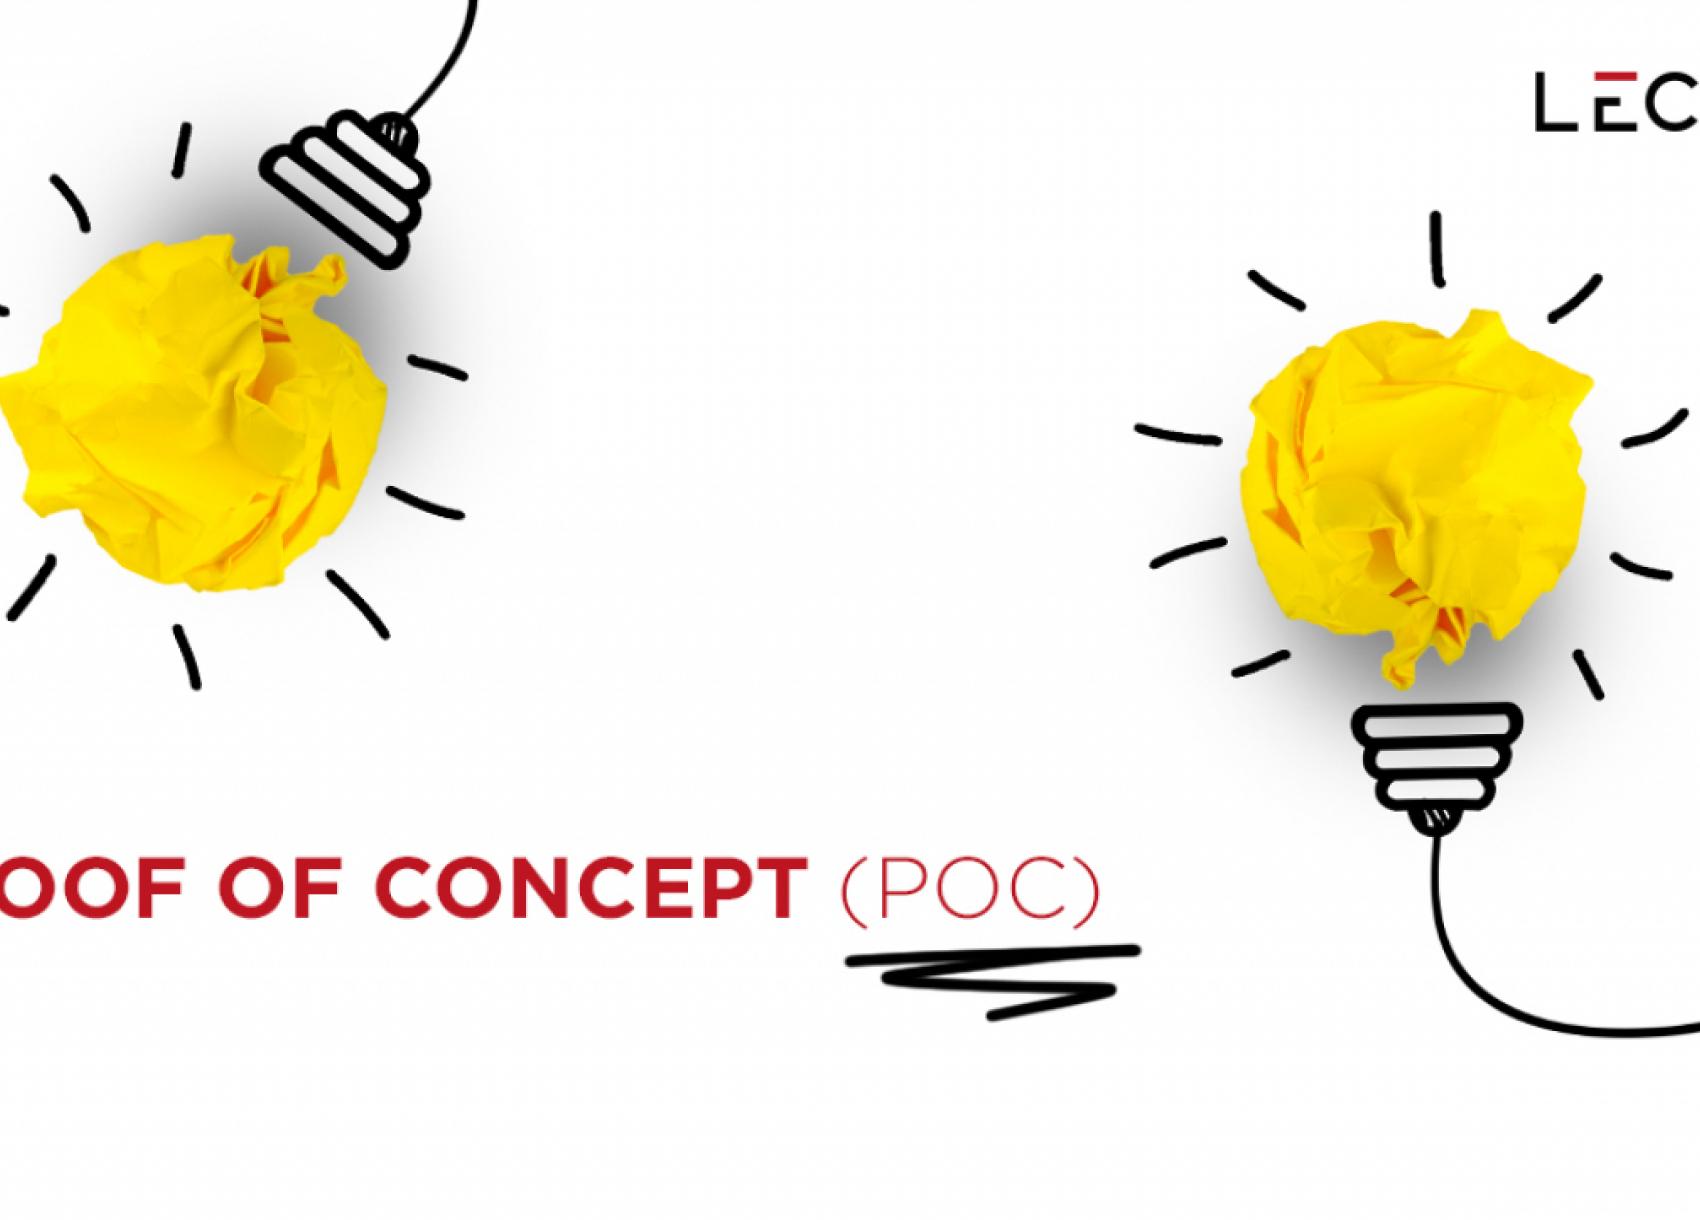 Drawing of two bulbs with the sentence "Proof of concept" written.